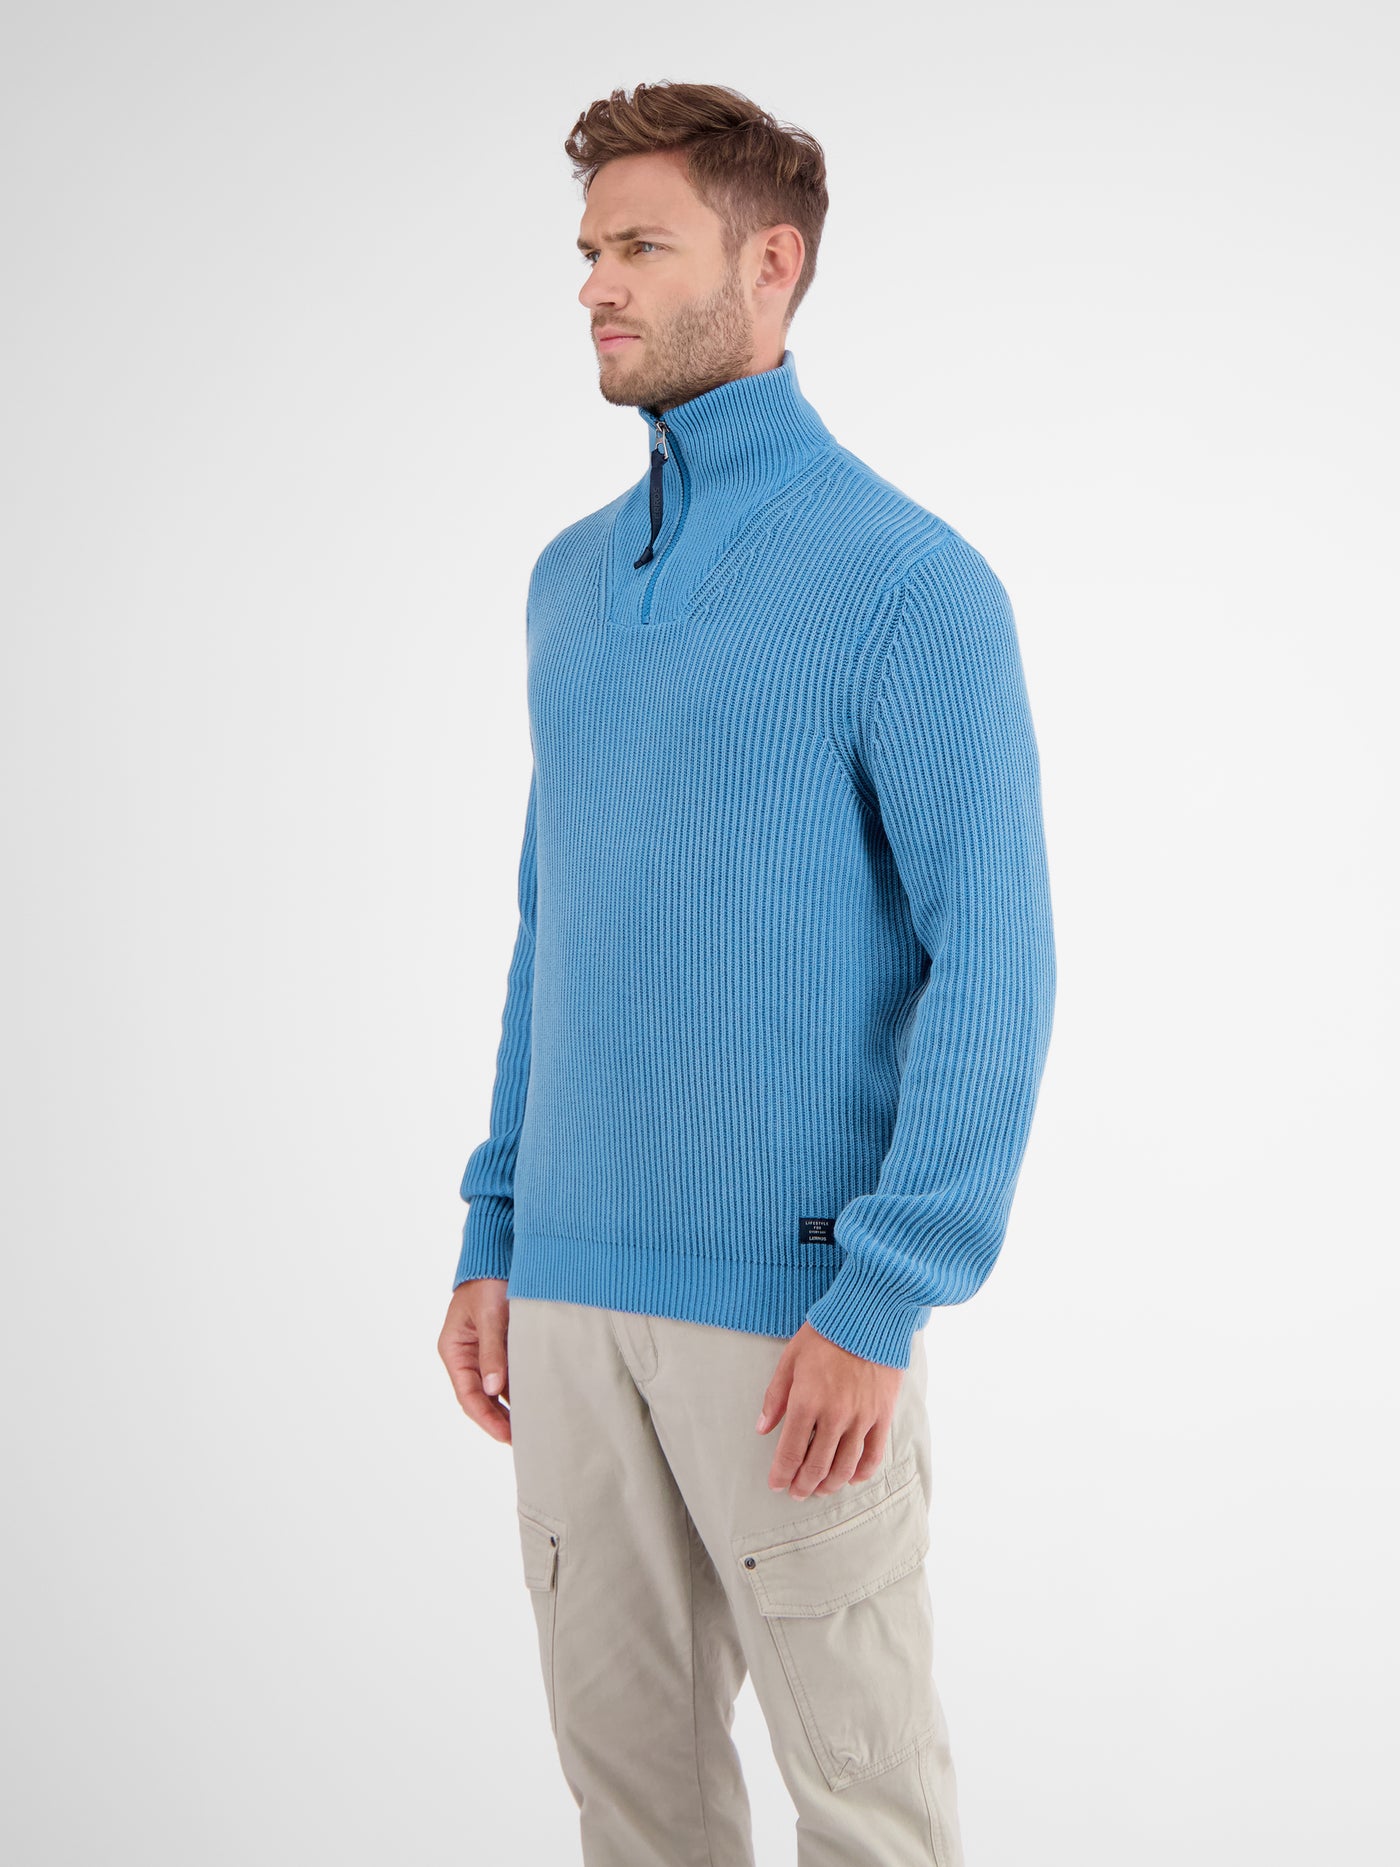 Knitted sweater in Troyer style